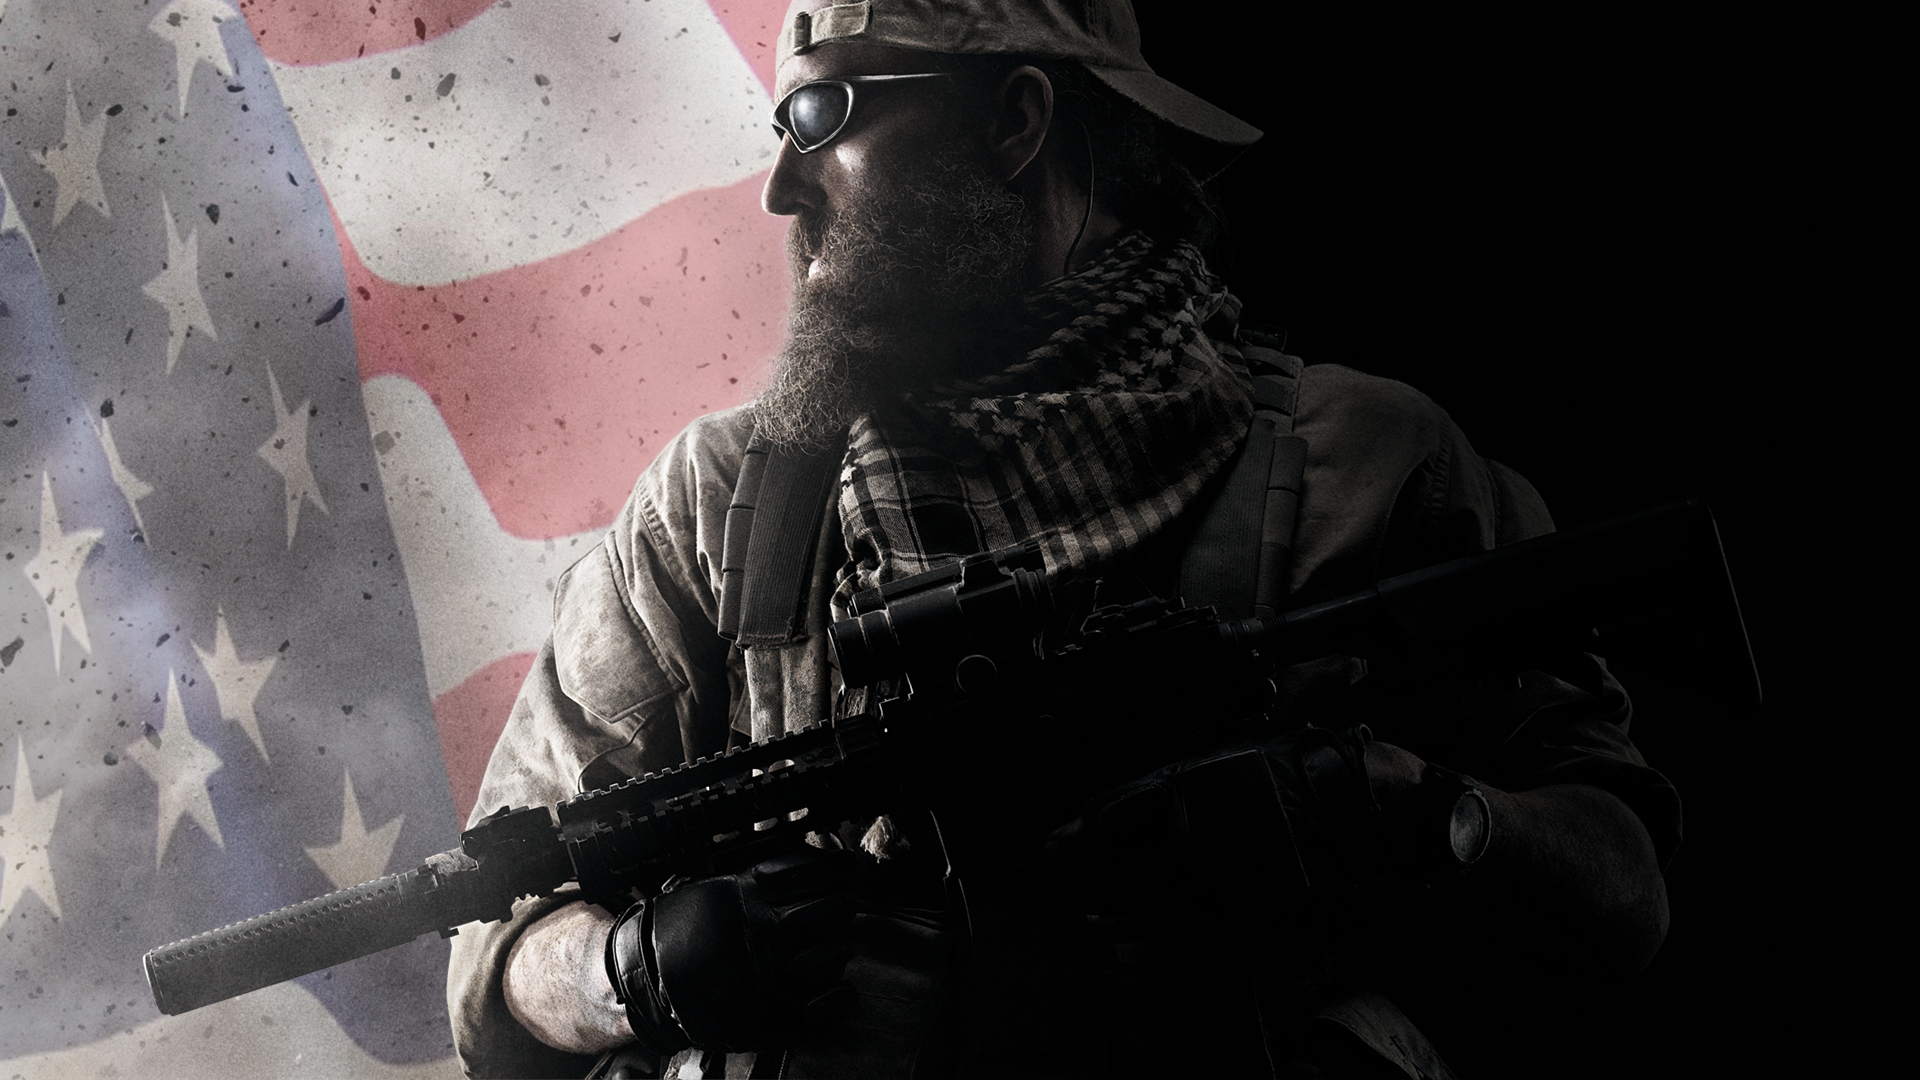 Free download wallpaper Medal Of Honor, Video Game on your PC desktop